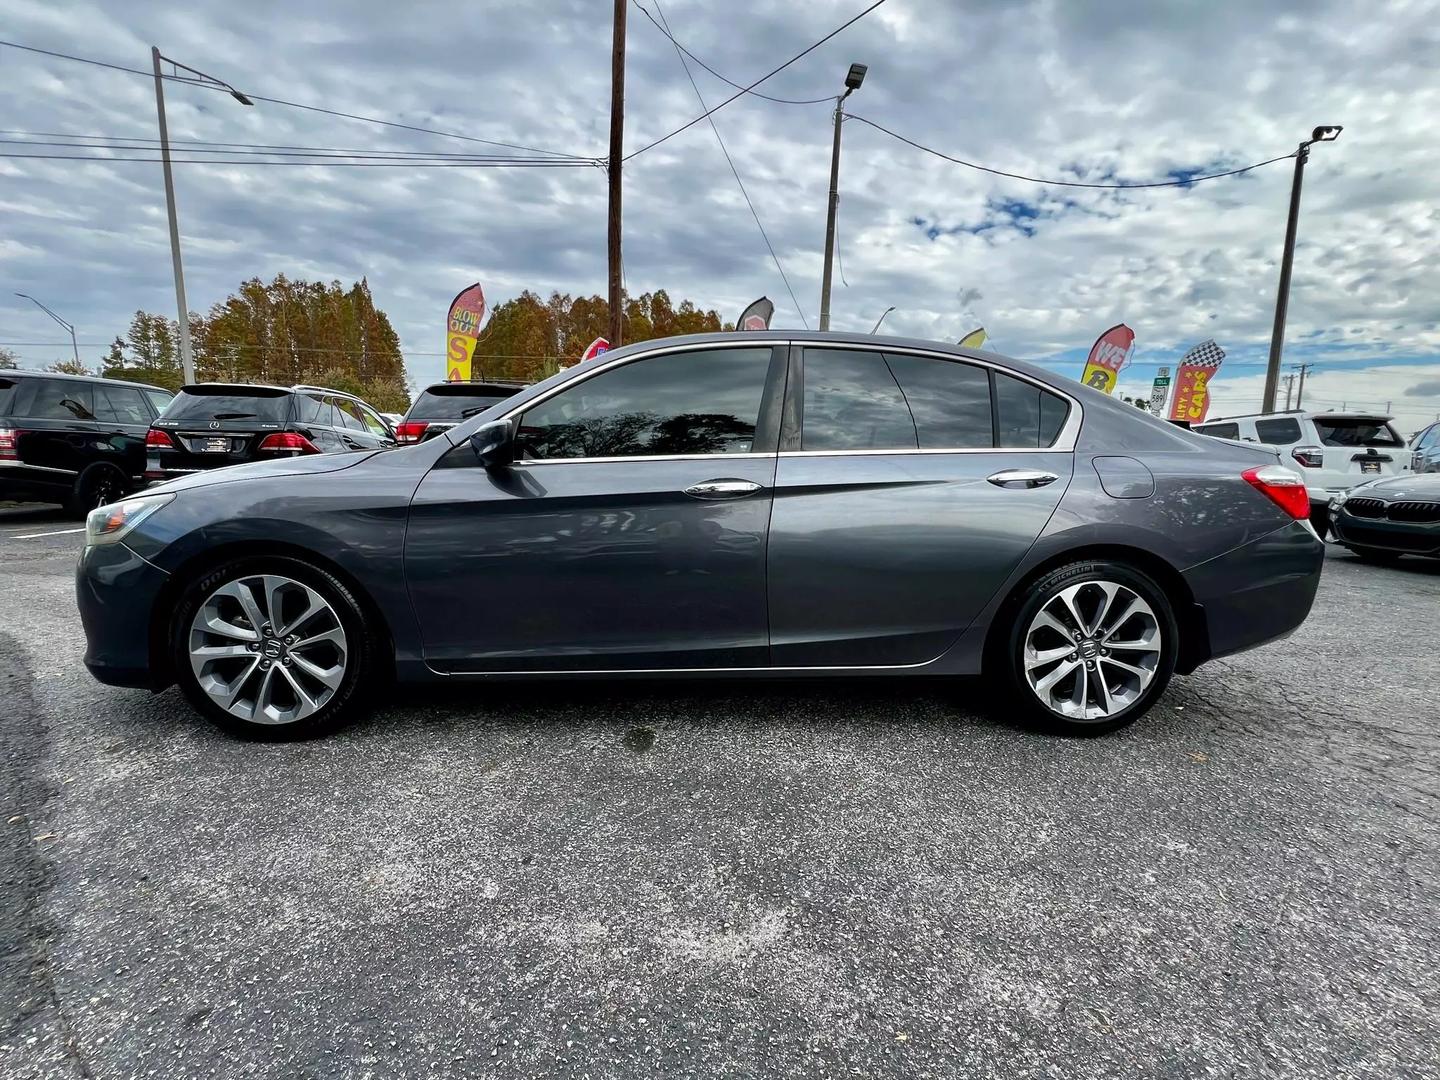 Used 2014 Honda Accord Sport with VIN 1HGCR2F53EA062125 for sale in Tampa, FL